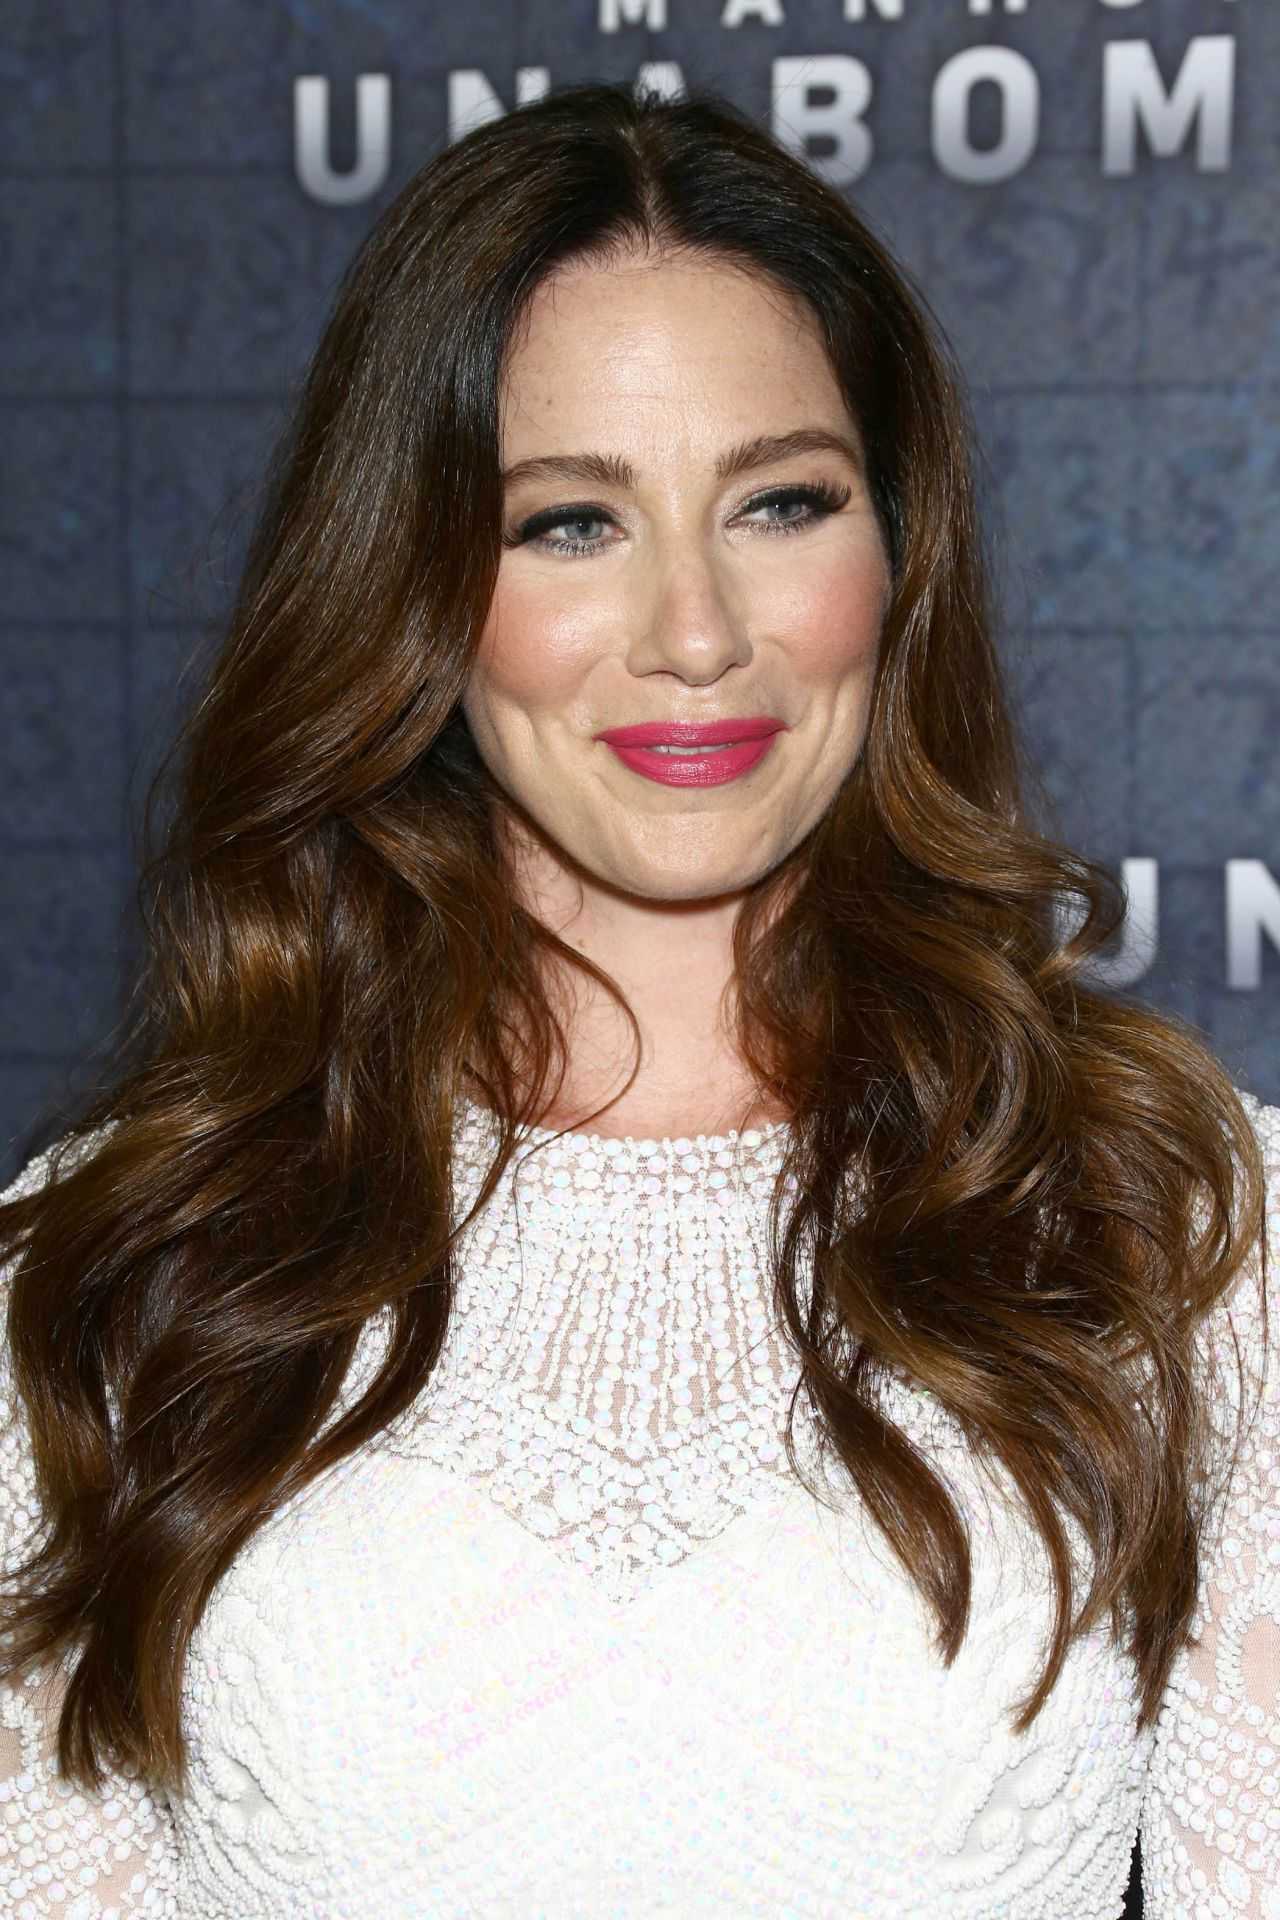 70+ Hot Pictures Of Lynn Collins Expose Her Smokin Hot Body 426